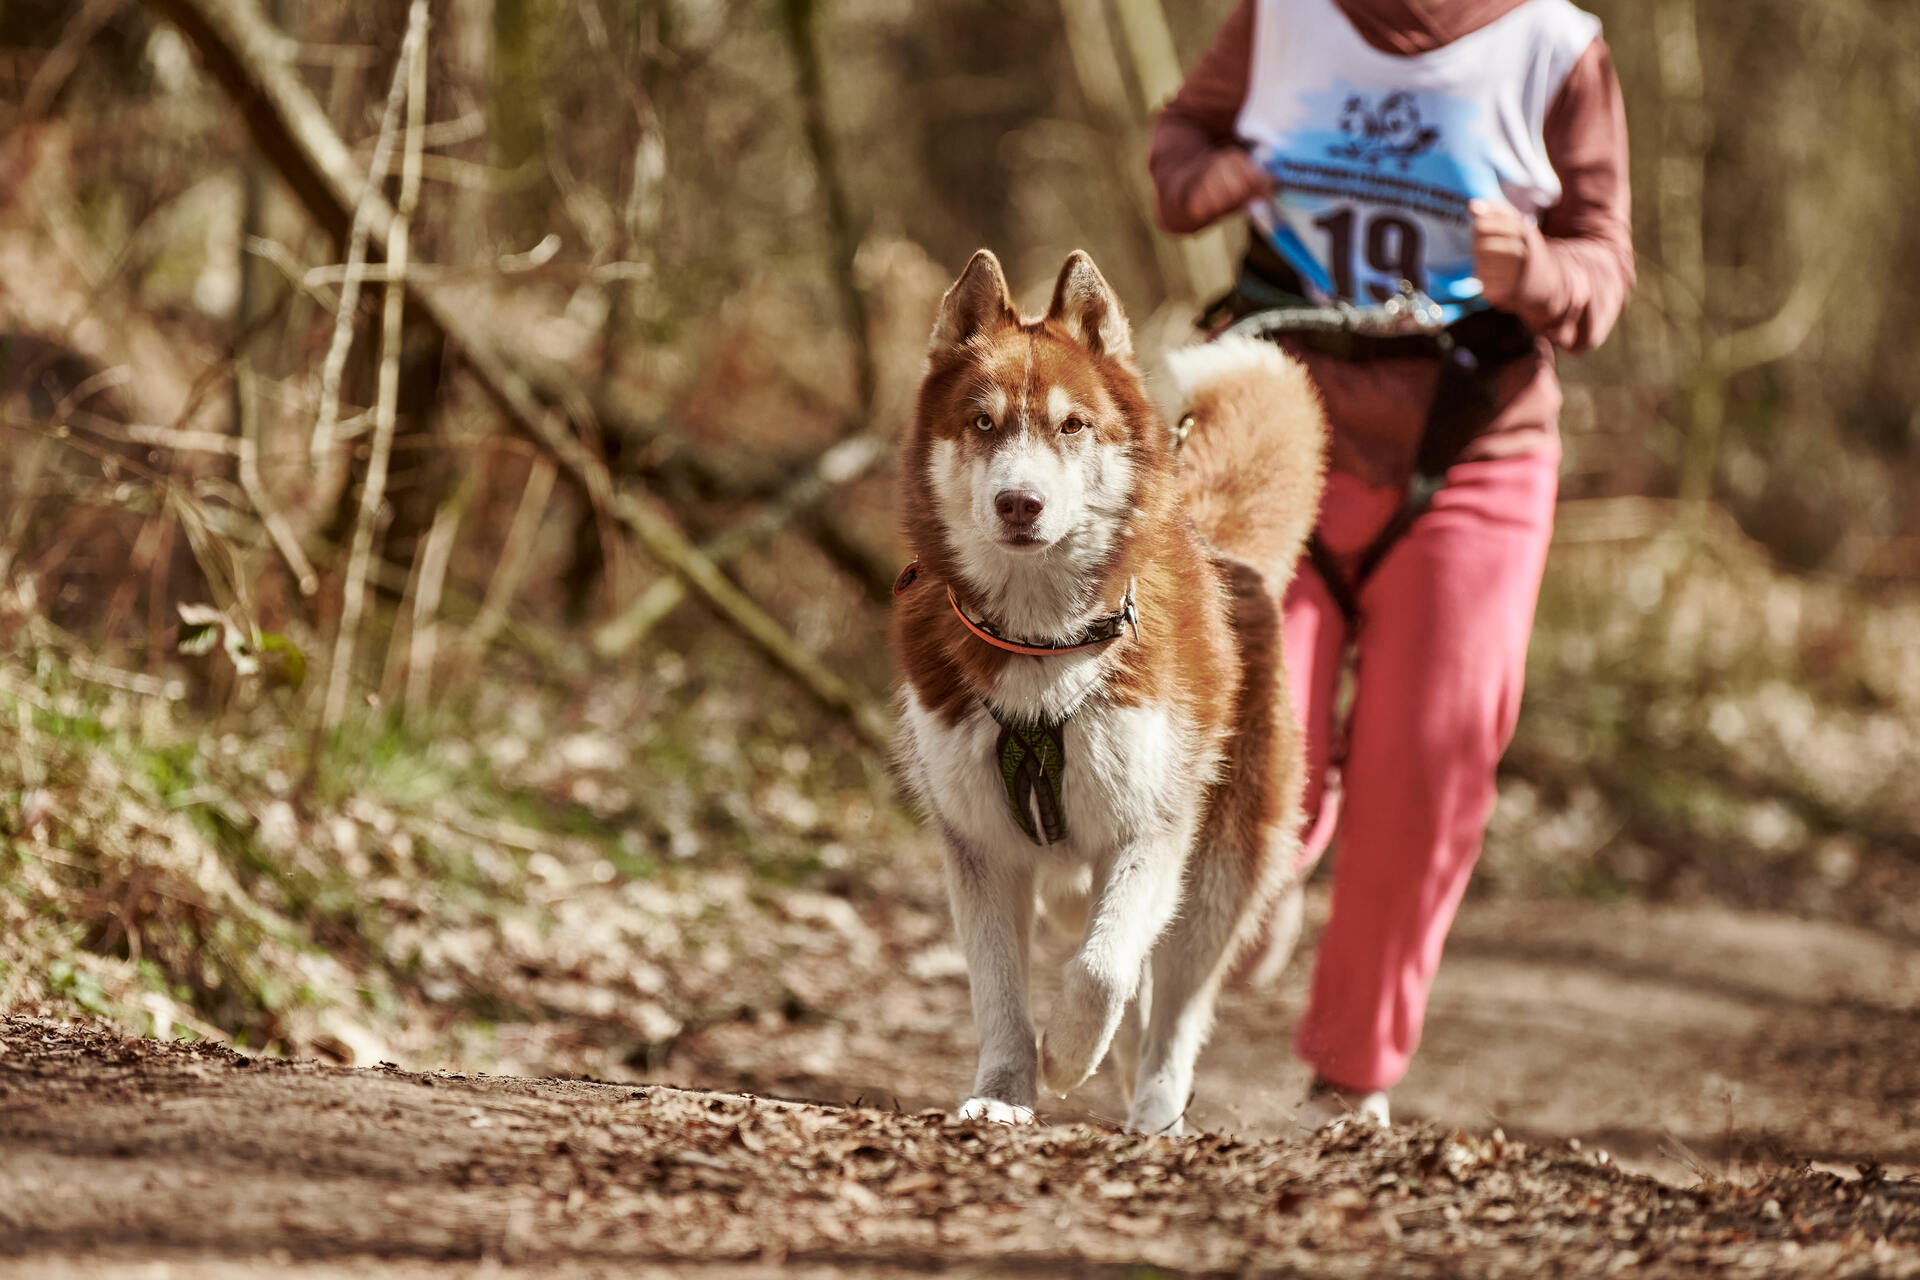 A Canicross competitor running in the woods with a Husky